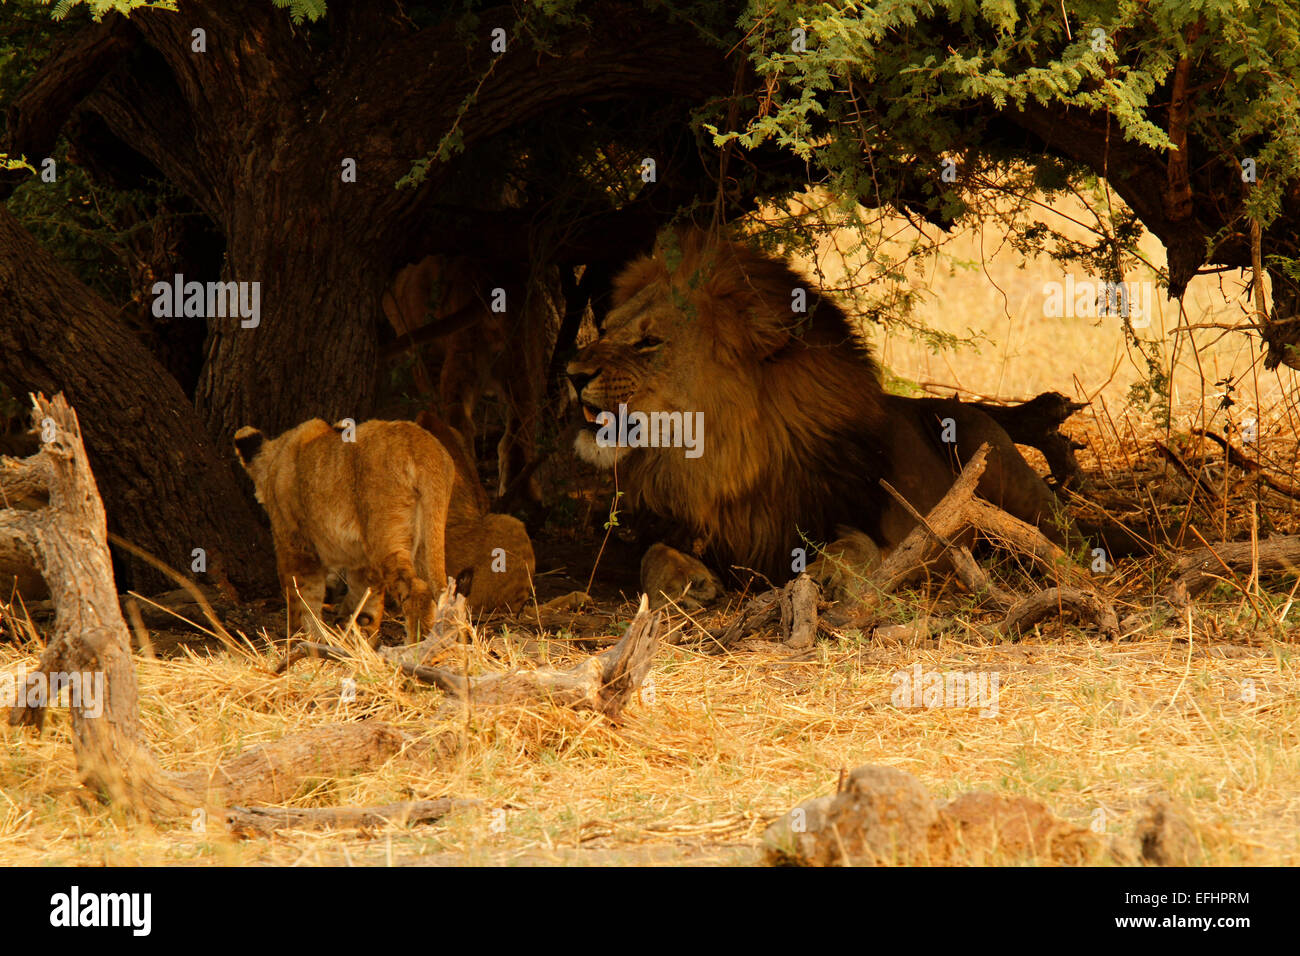 African Lions big male lion with two lion cubs in the shade of an Acacia thorn tree, big mane on the male lion Stock Photo